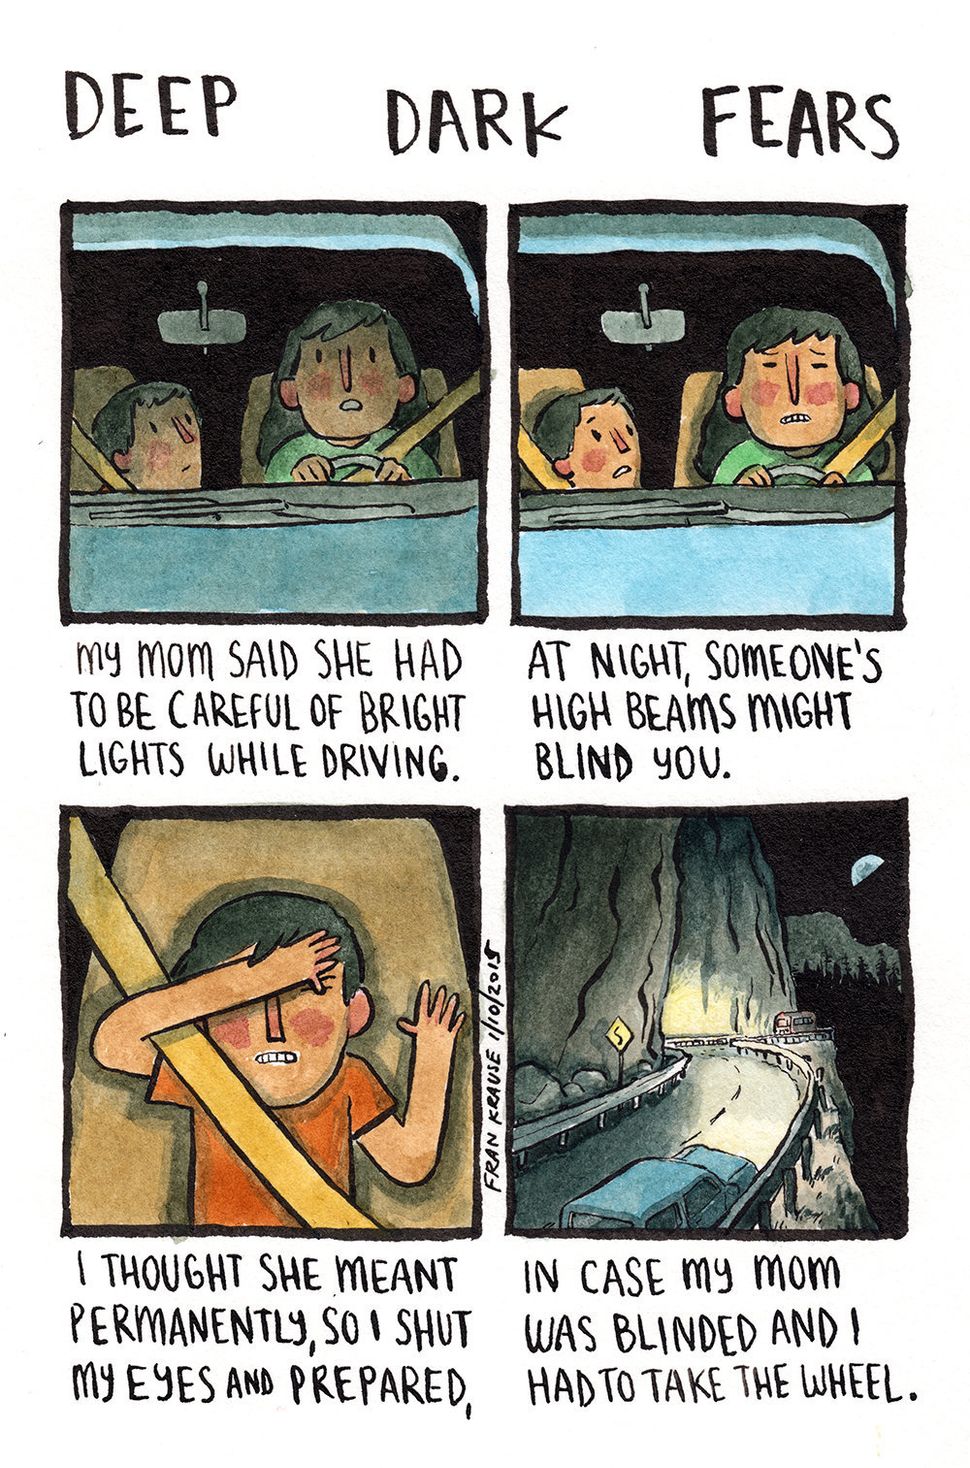 Cartoonist Sheds Light On Your Darkest, Most Irrational Fears | HuffPost